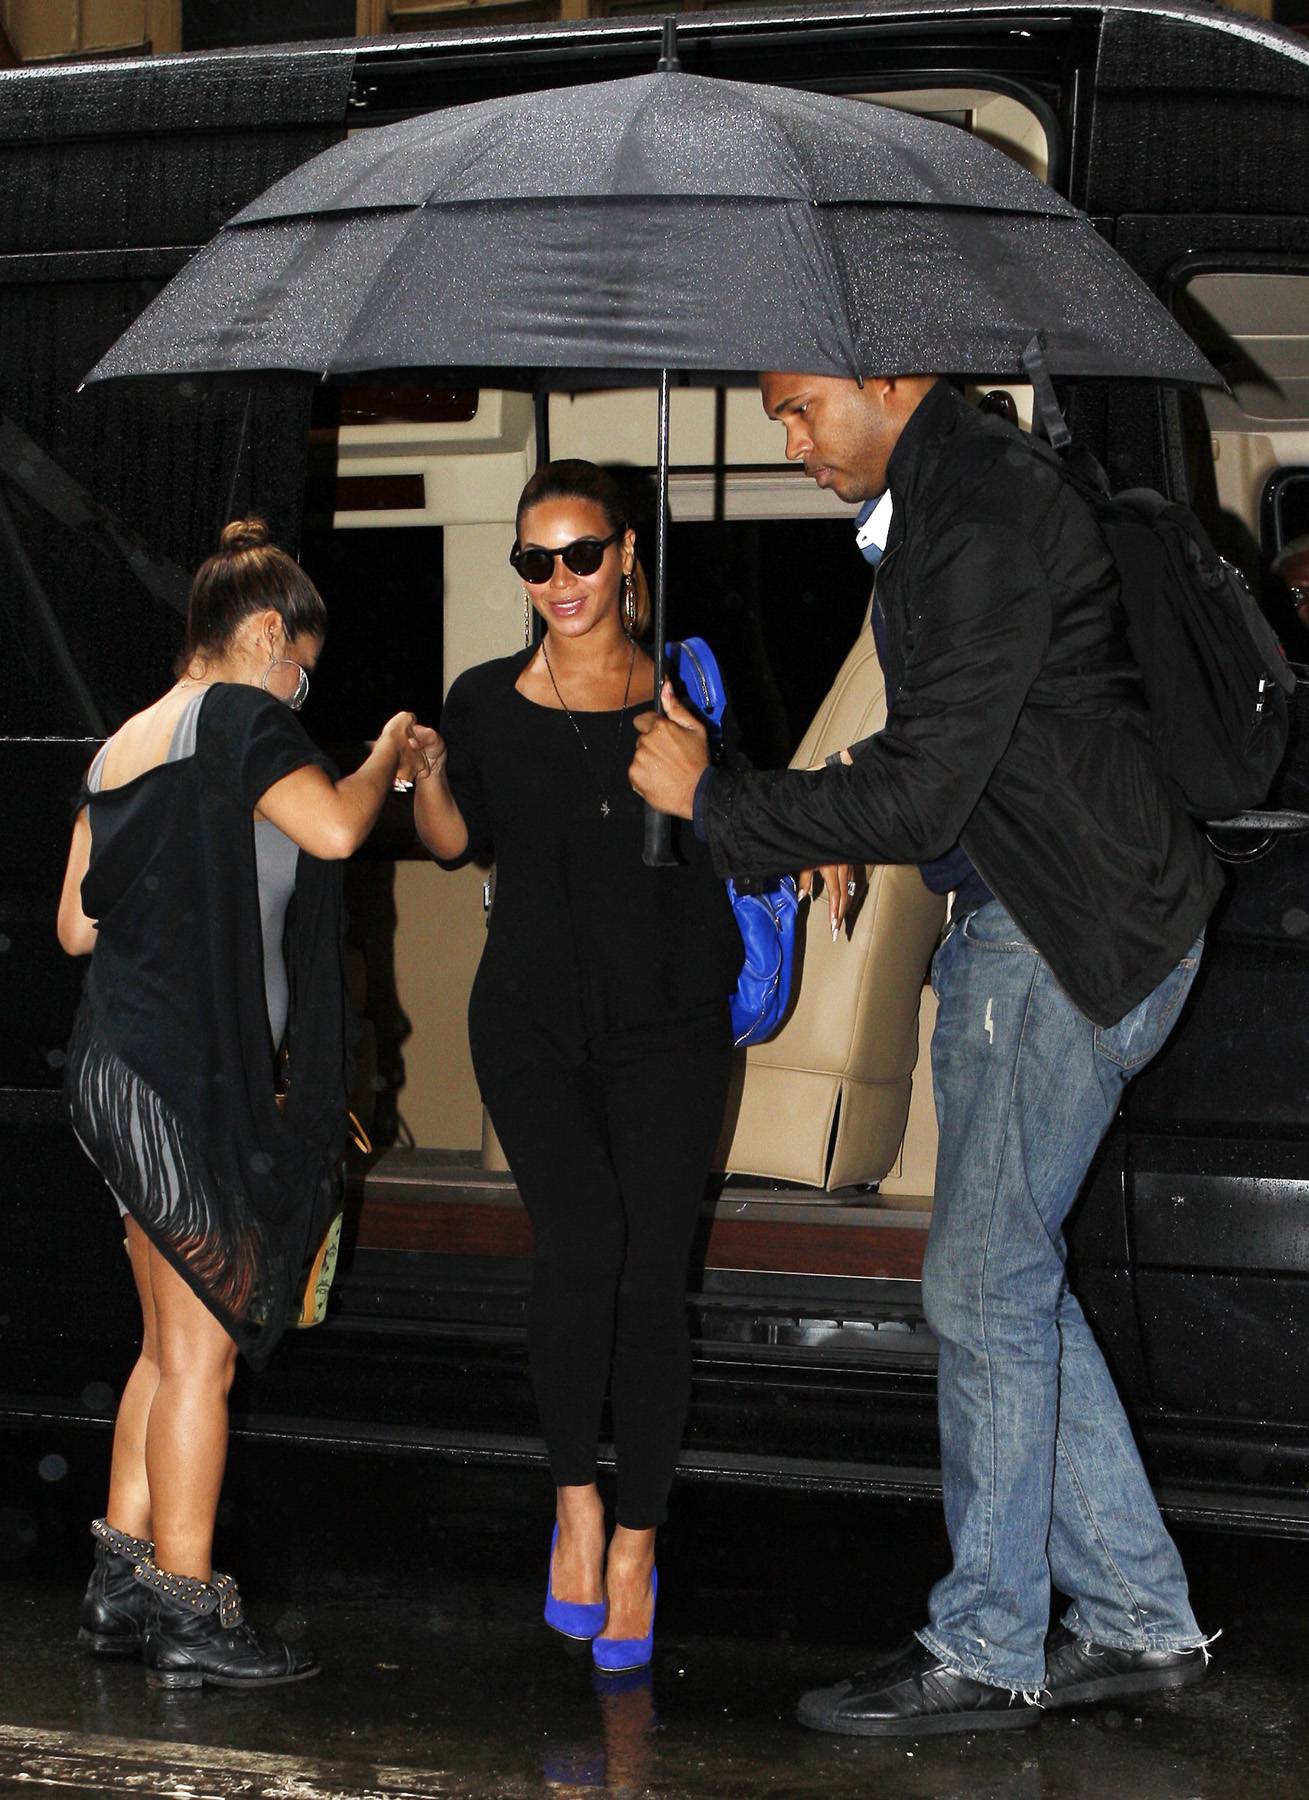 Busy Bey\r - Hot-momma-to-be&nbsp;Beyoncé has been making moves lately, or maybe the paps are on her heels more than usual now that she's carrying precious cargo. Here, she is being helped out of her car and being shielded from the rain by the man who never seems to leave her side, The Bodyguard aka&nbsp;Julius.&nbsp; (Photo: Fame Pictures)